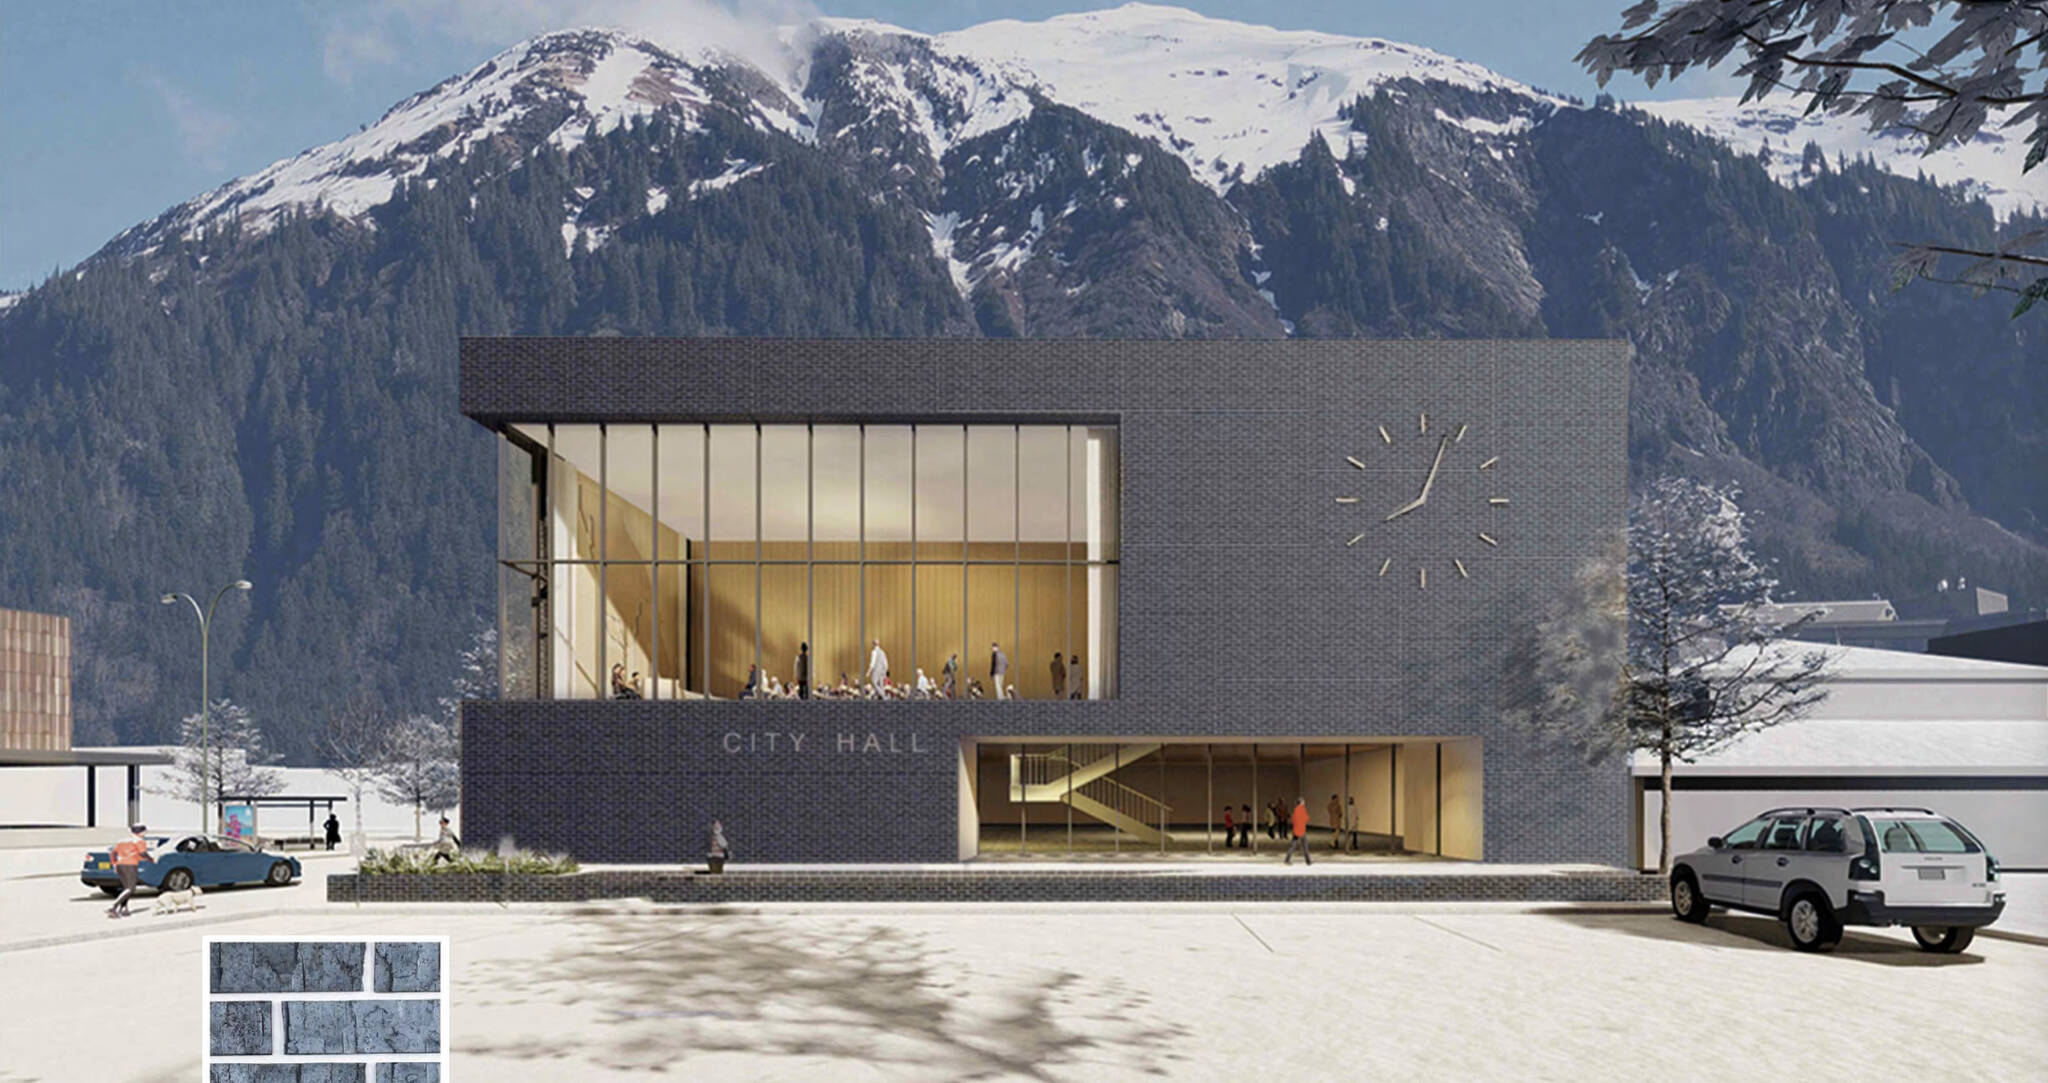 An artist depiction of a new city hall building at 450 Whittier St. in Juneau, which would cost an estimated $41 million with an underground parking garage, according to a presentation to Juneau Assembly members Monday. (Courtesy Image / North Wind Architects)